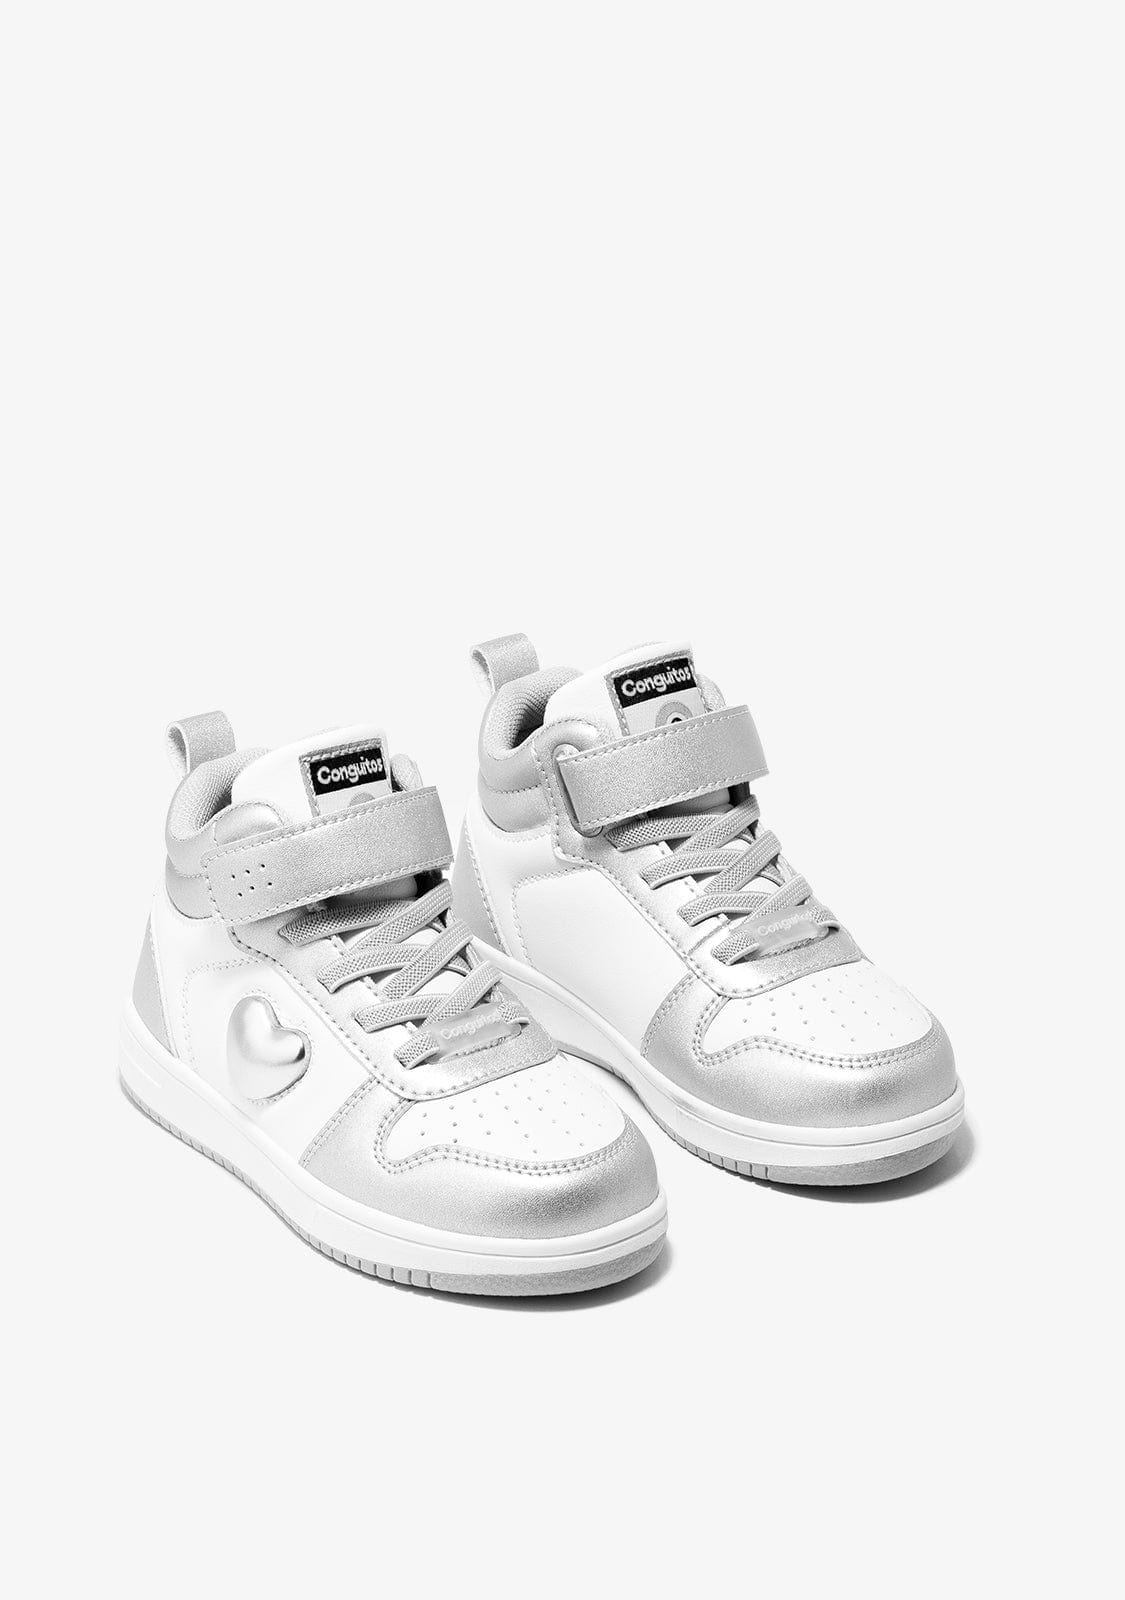 CONGUITOS Shoes Girl´s Silver White With Lights Hi-Top Sneakers Napa